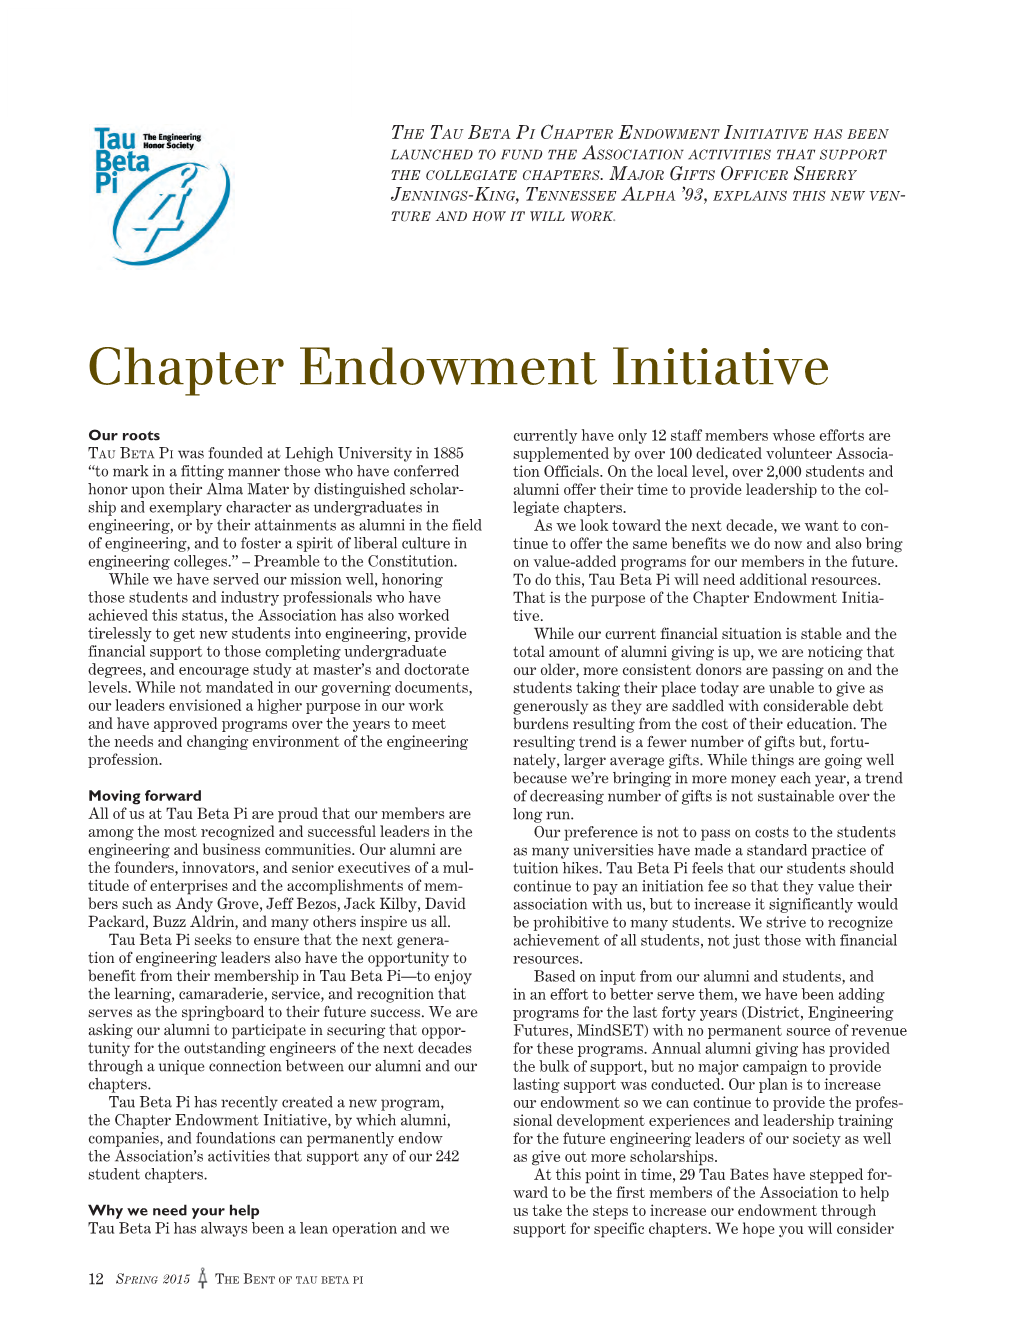 Chapter Endowment Initiative Has Been Launched to Fund the Association Activities That Support the Collegiate Chapters